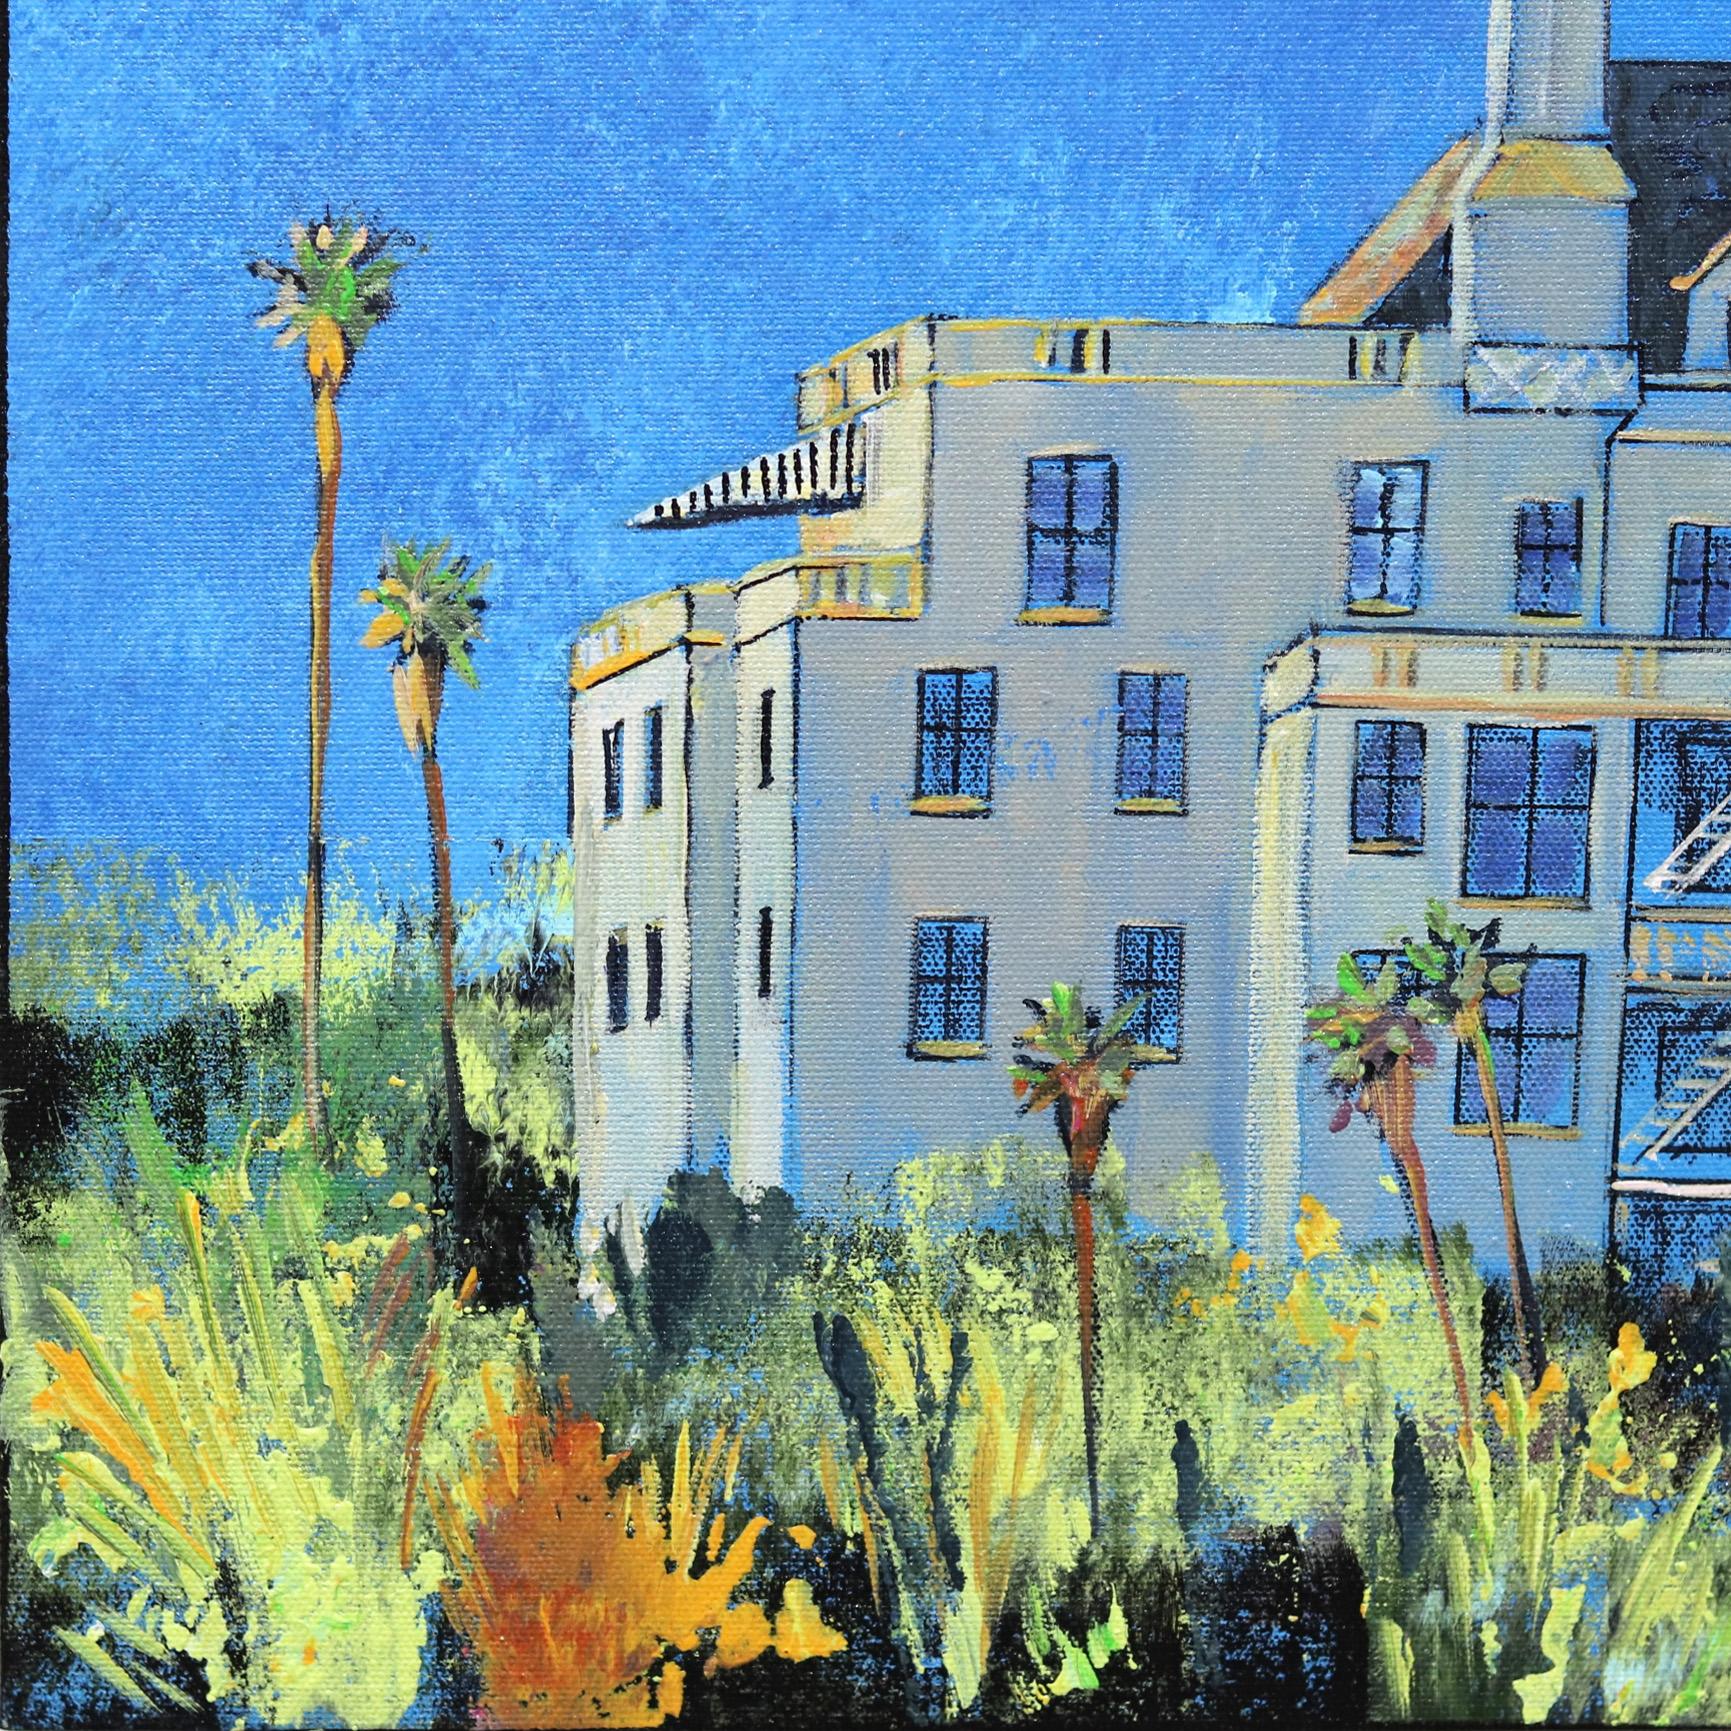 Afternoon Light on Chateau Marmont - Blue Landscape Painting by Kathleen Keifer